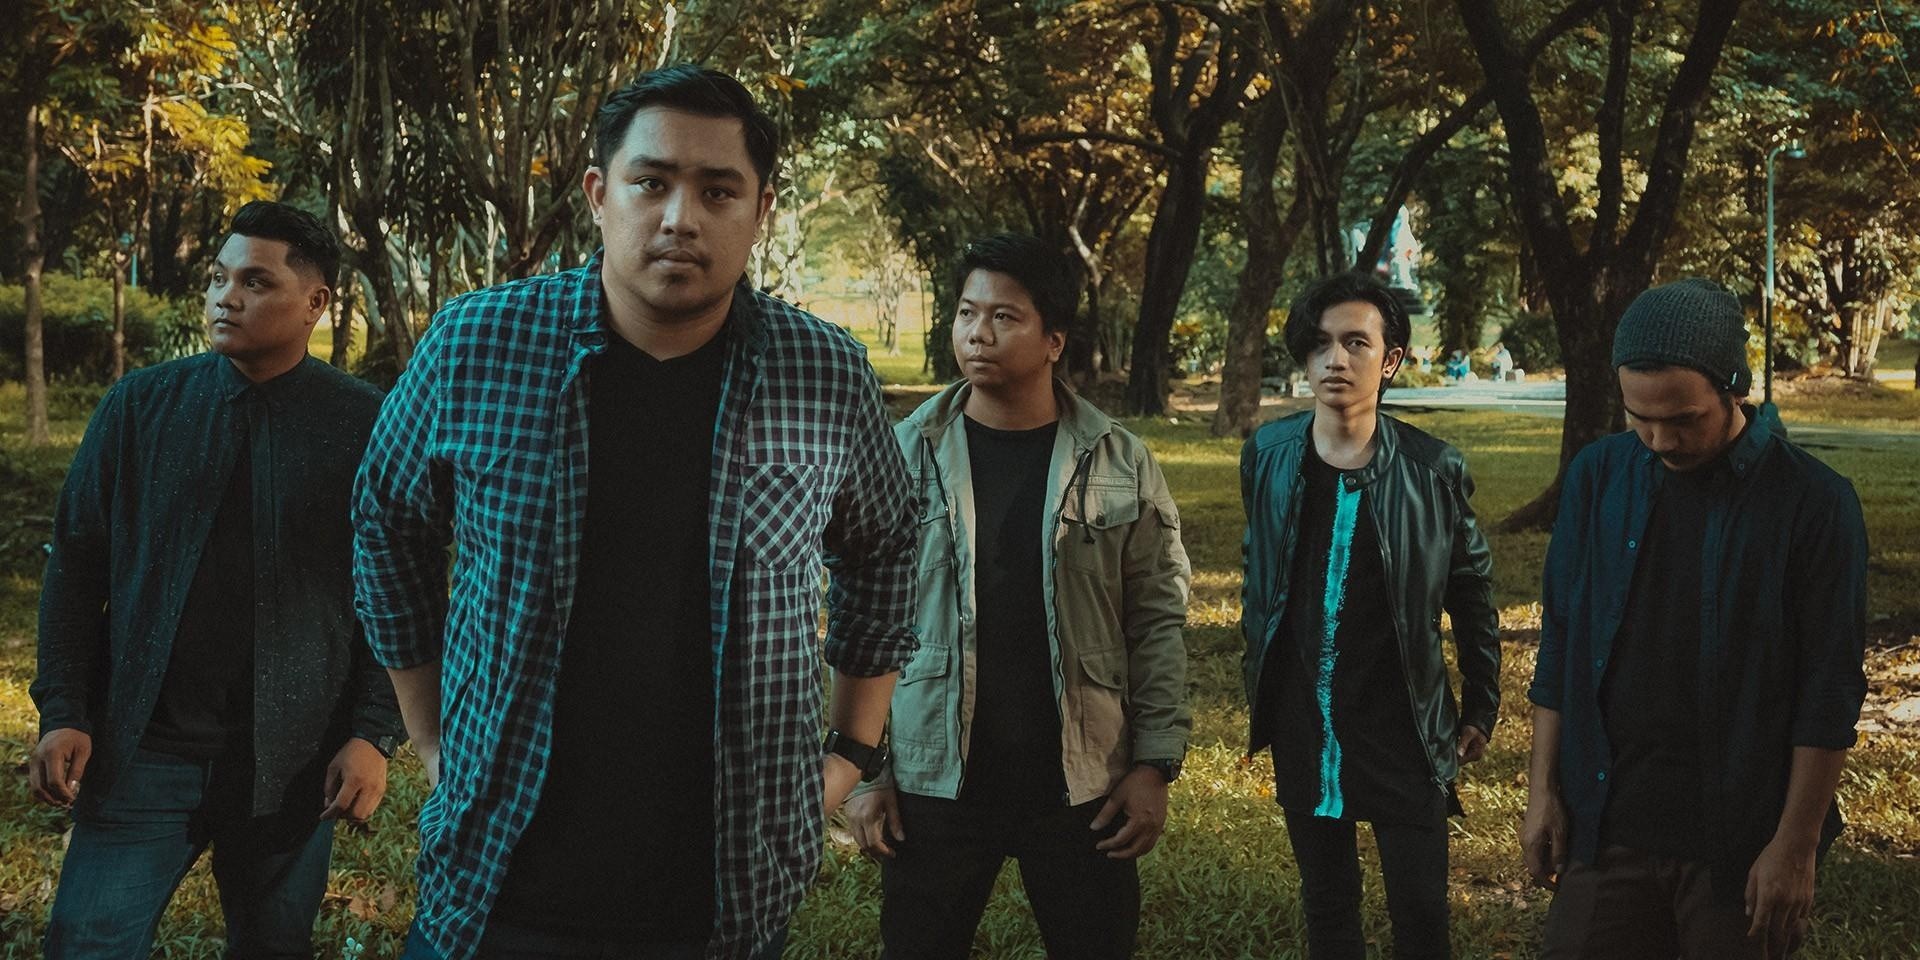 December Avenue to tour Canada in 2019